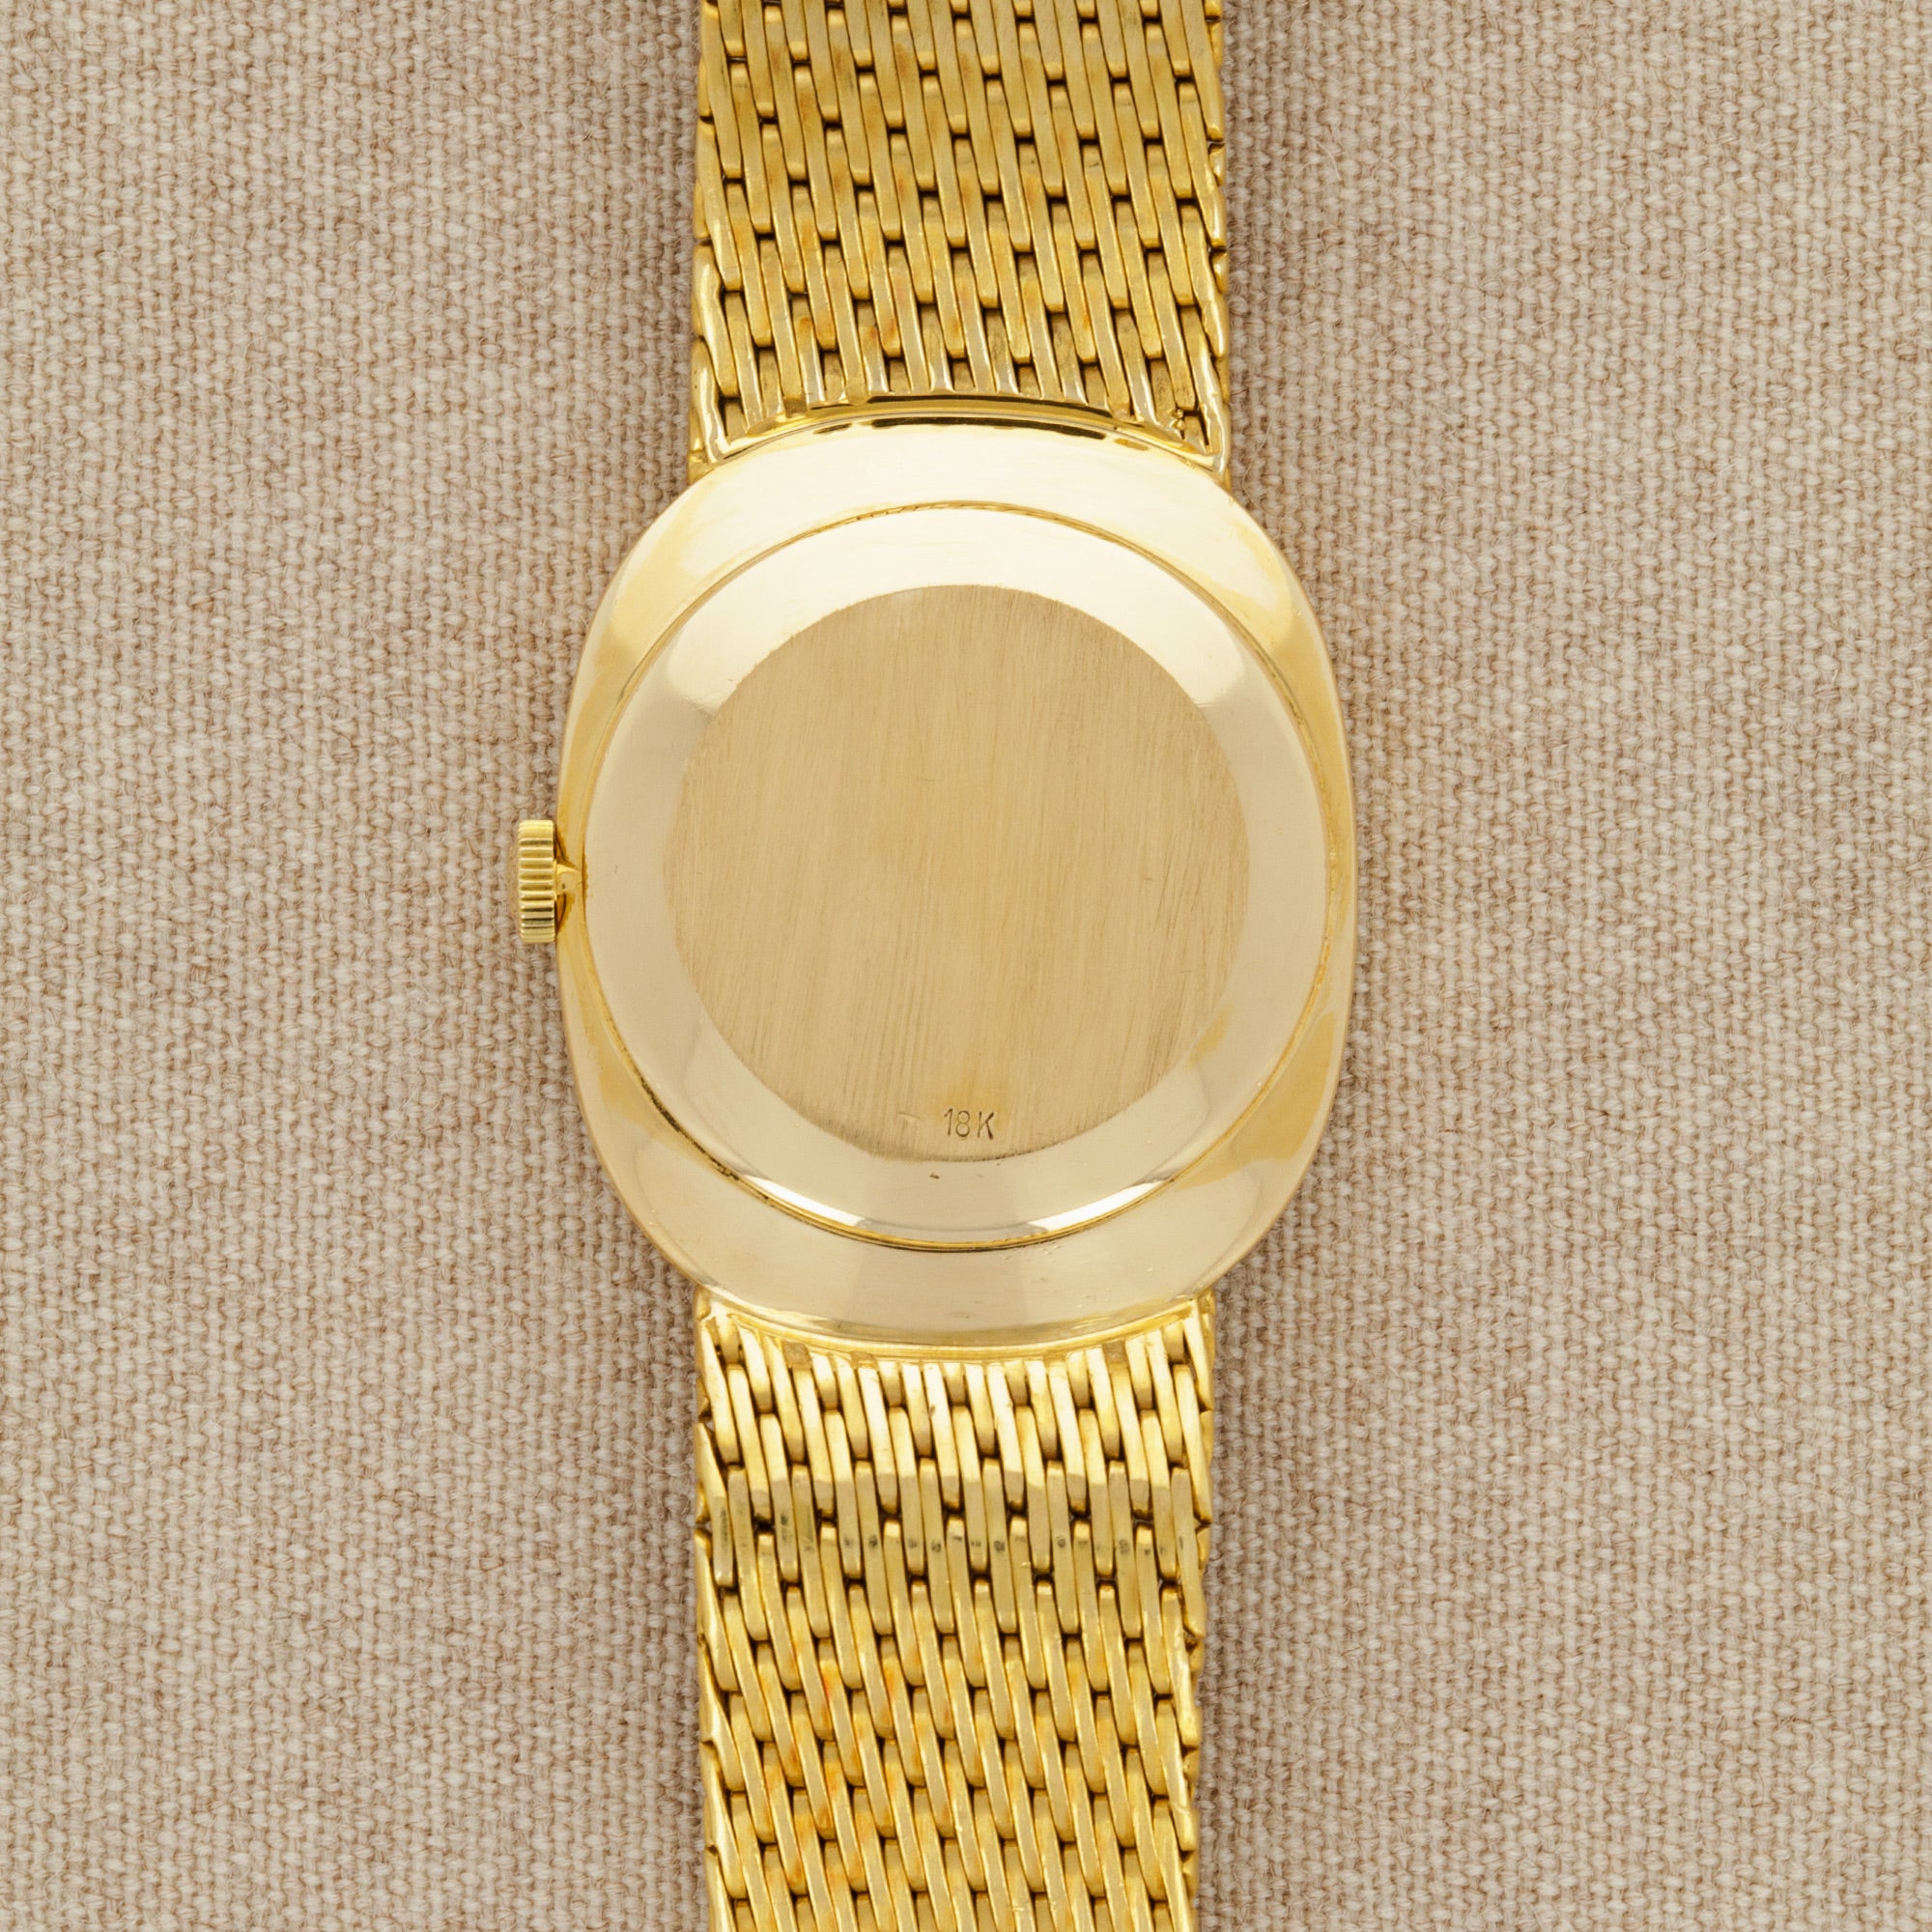 Patek Philippe - Patek Philippe Yellow Gold Ellipse Ref. 3548 Retailed by Tiffany &amp; Co. - The Keystone Watches